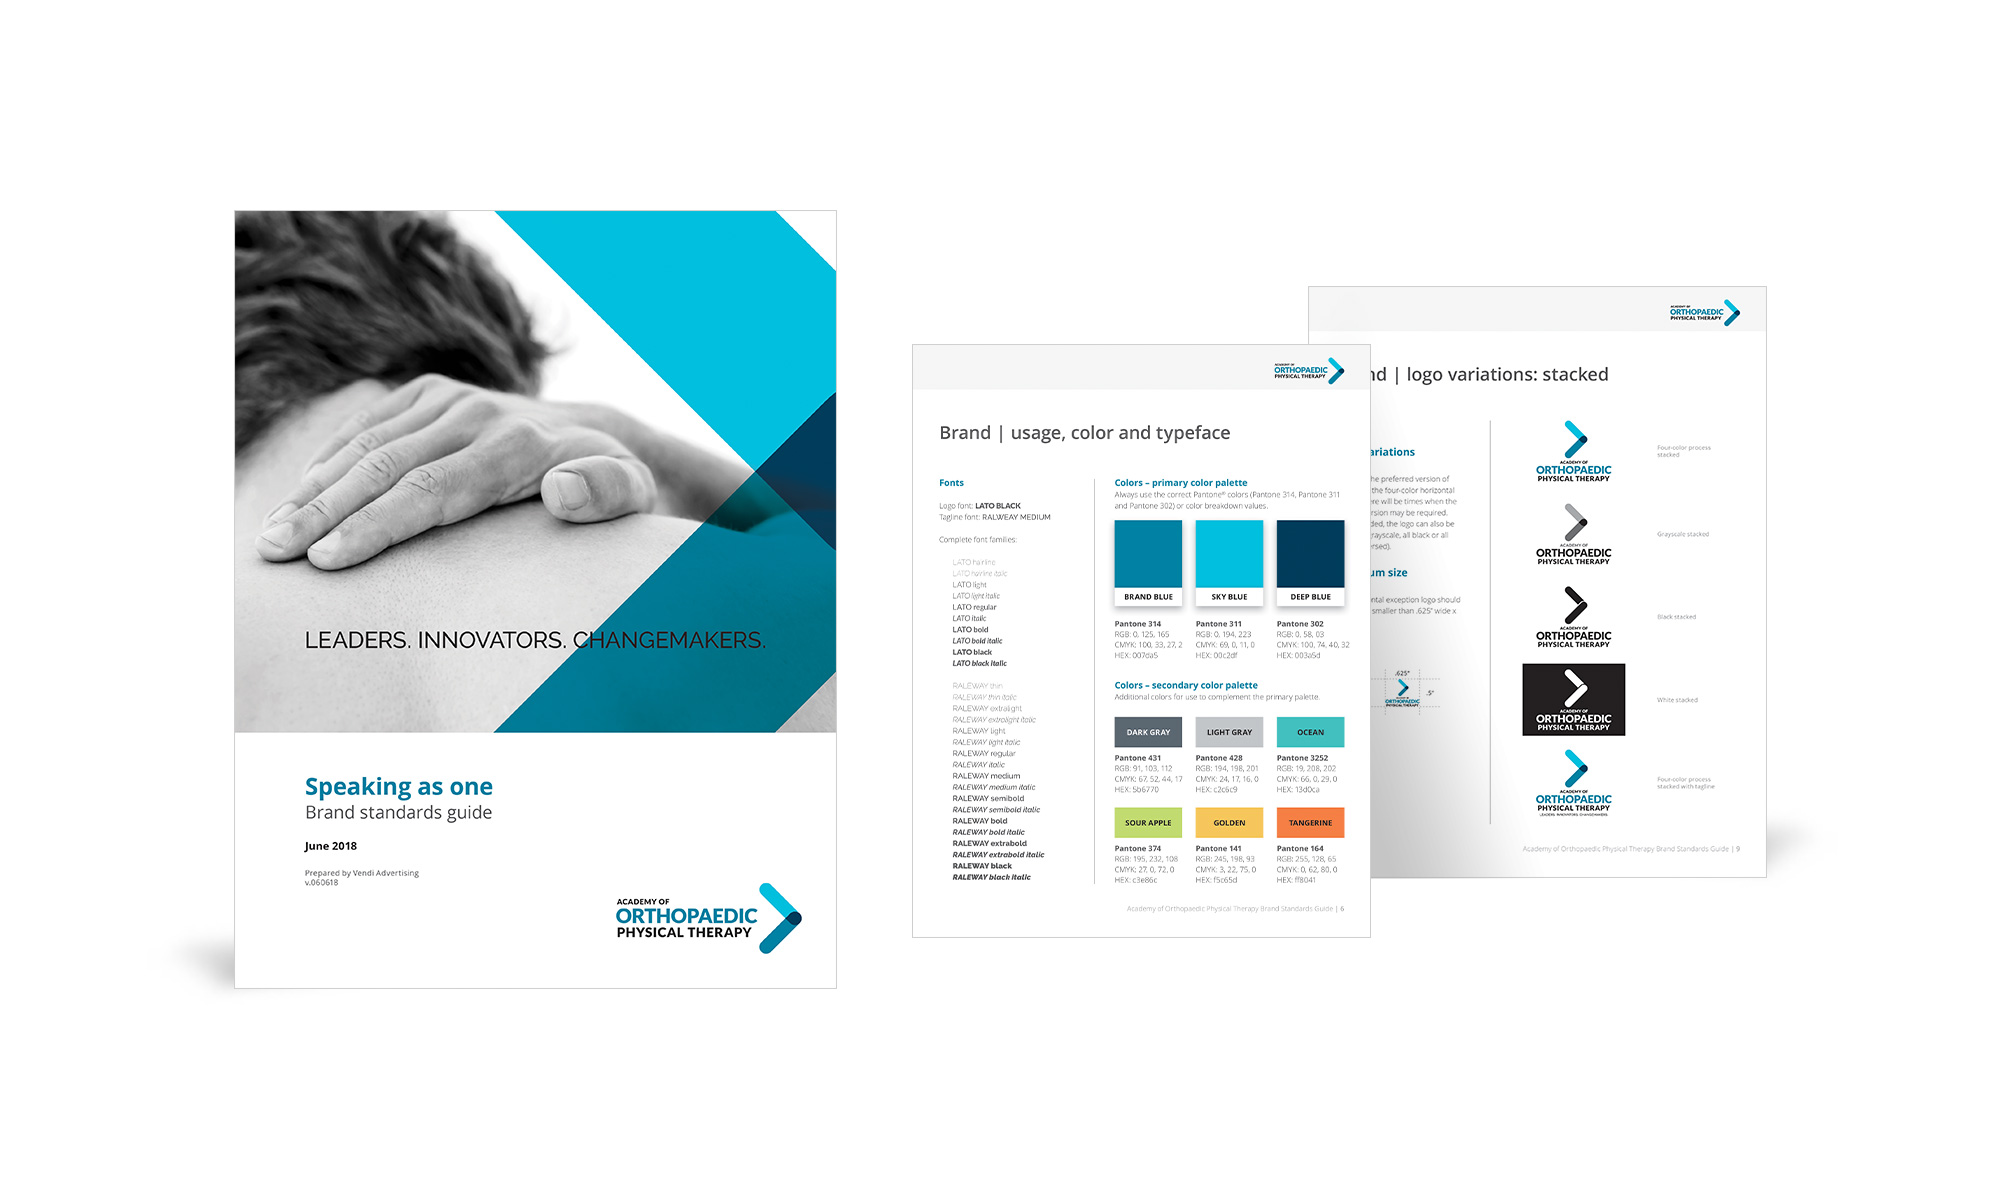 Pages from the Academy of Orthopaedic Physical Therapy Speaking as one brand standards guide created by Vendi Advertising